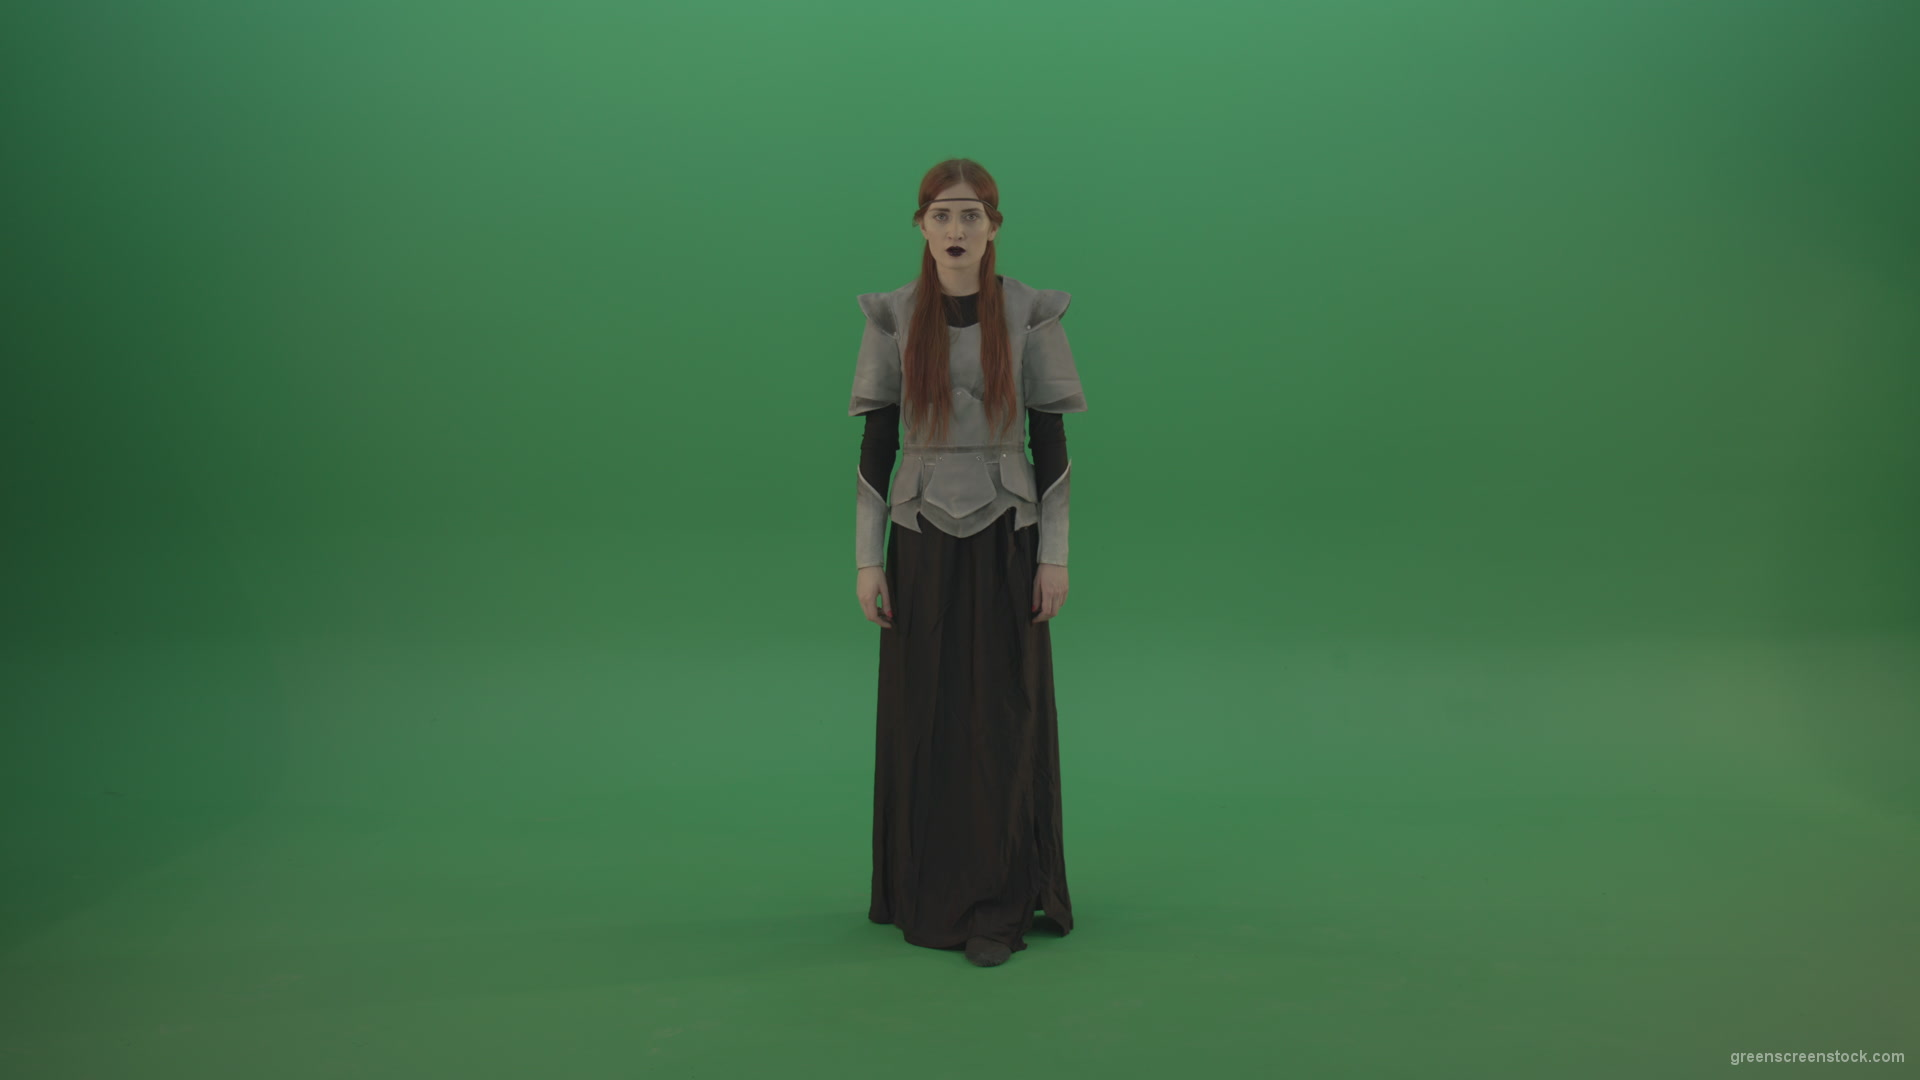 Redheaded-girl-in-full-height-in-medieval-warrior-clothing-asks-for-help-from-the-gods-on-green-screen_002 Green Screen Stock